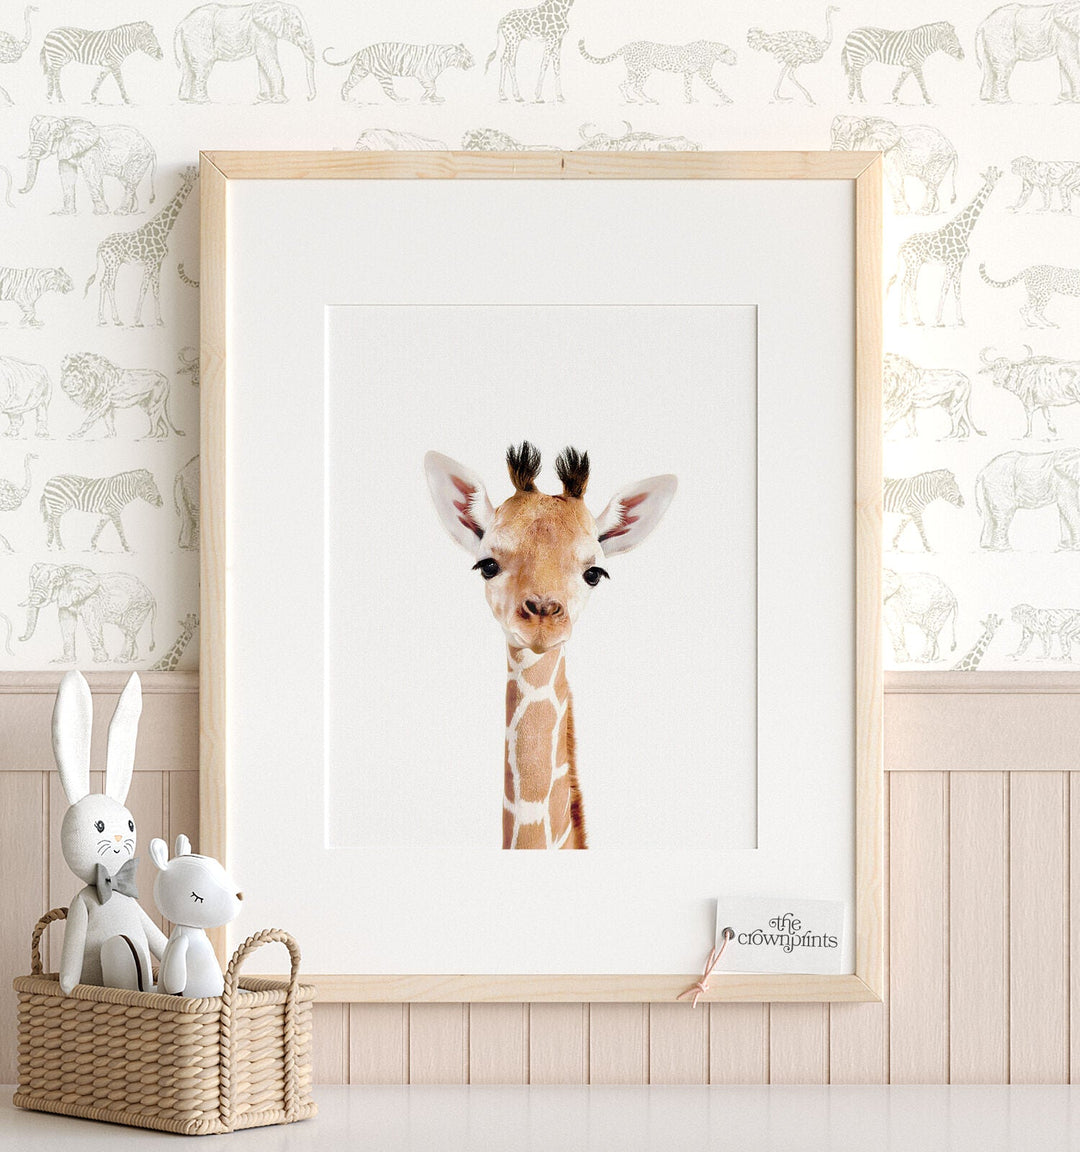 ALL > Wall Stickers Safari animals Buy from e-shop